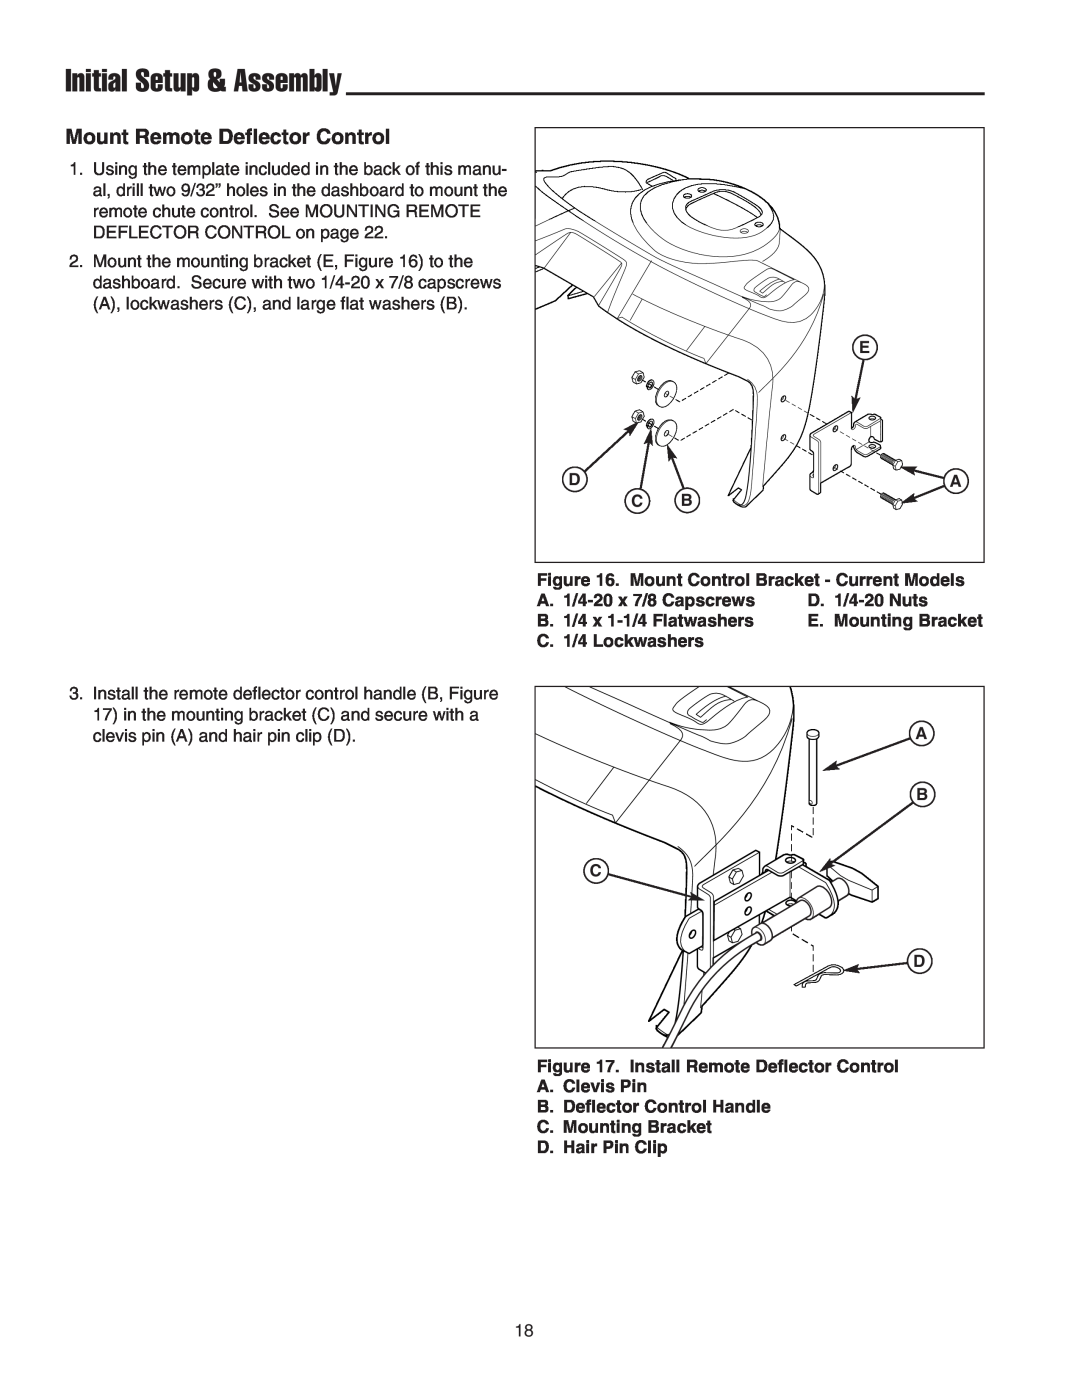 Snapper 1694296, 1694295, 1694144, 1694150 manual Mount Remote Deflector Control, Initial Setup & Assembly 